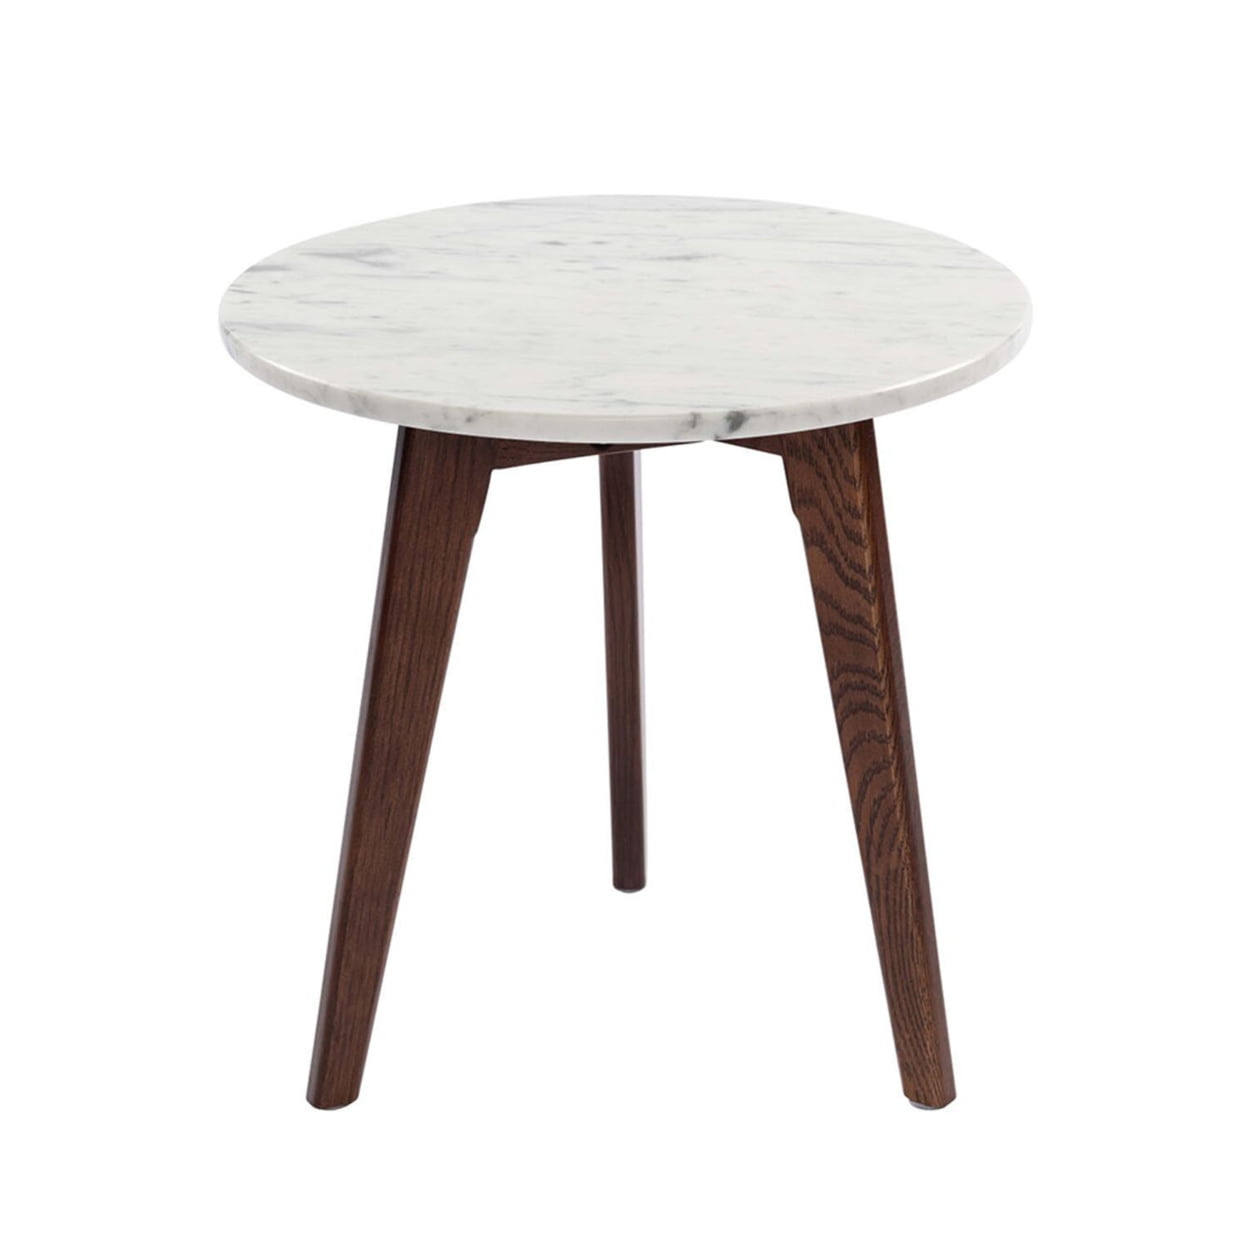 Tbc-4064-pt1811-wht 15 In. Cherie Round Italian Carrara White Marble Table With Walnut Legs